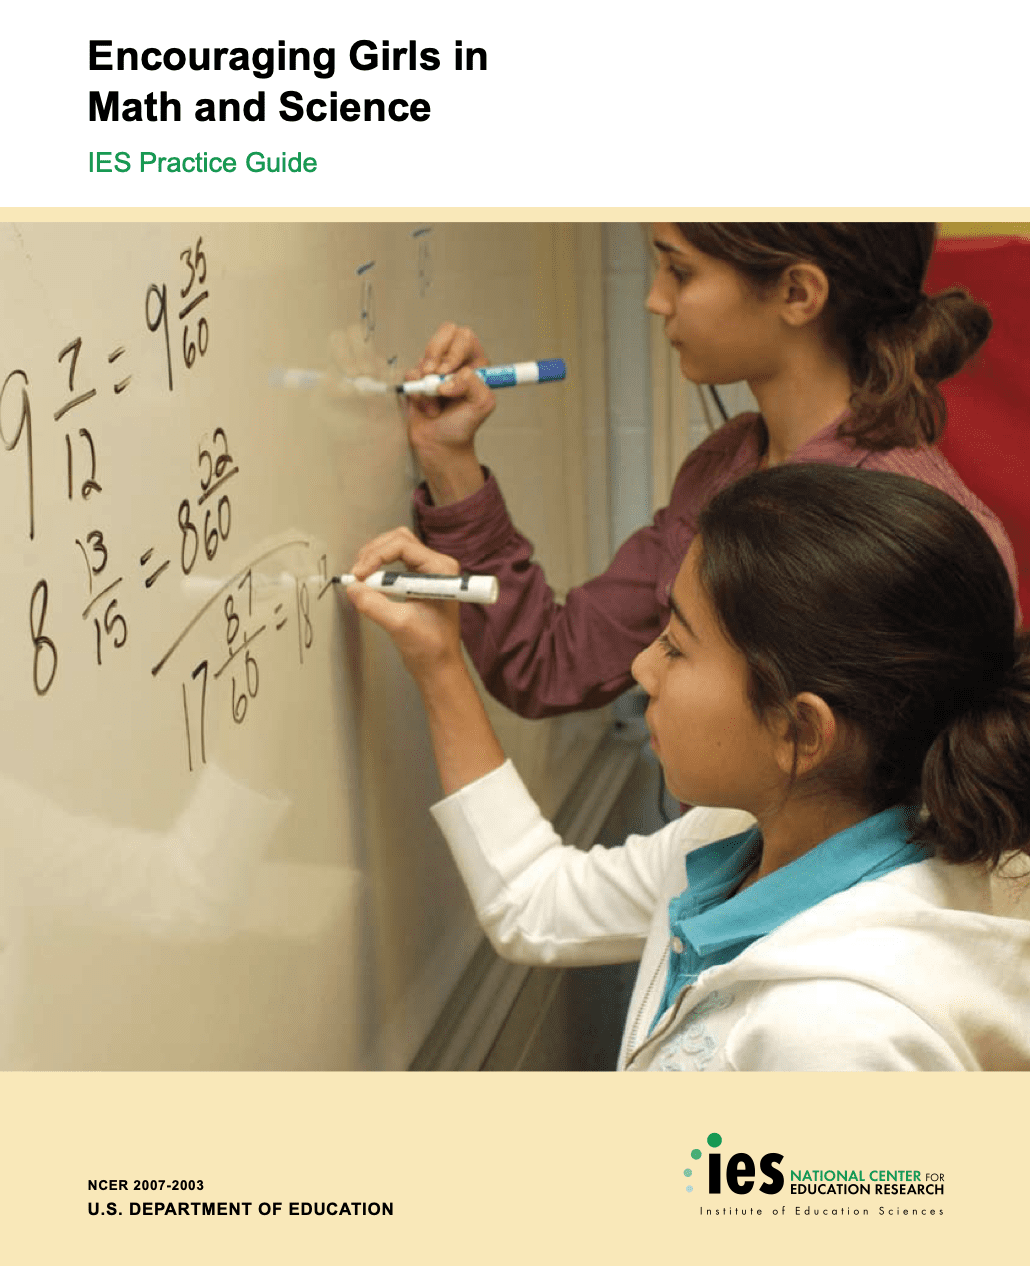 Cover of resource with photo of two girls solving math problems on a whiteboard